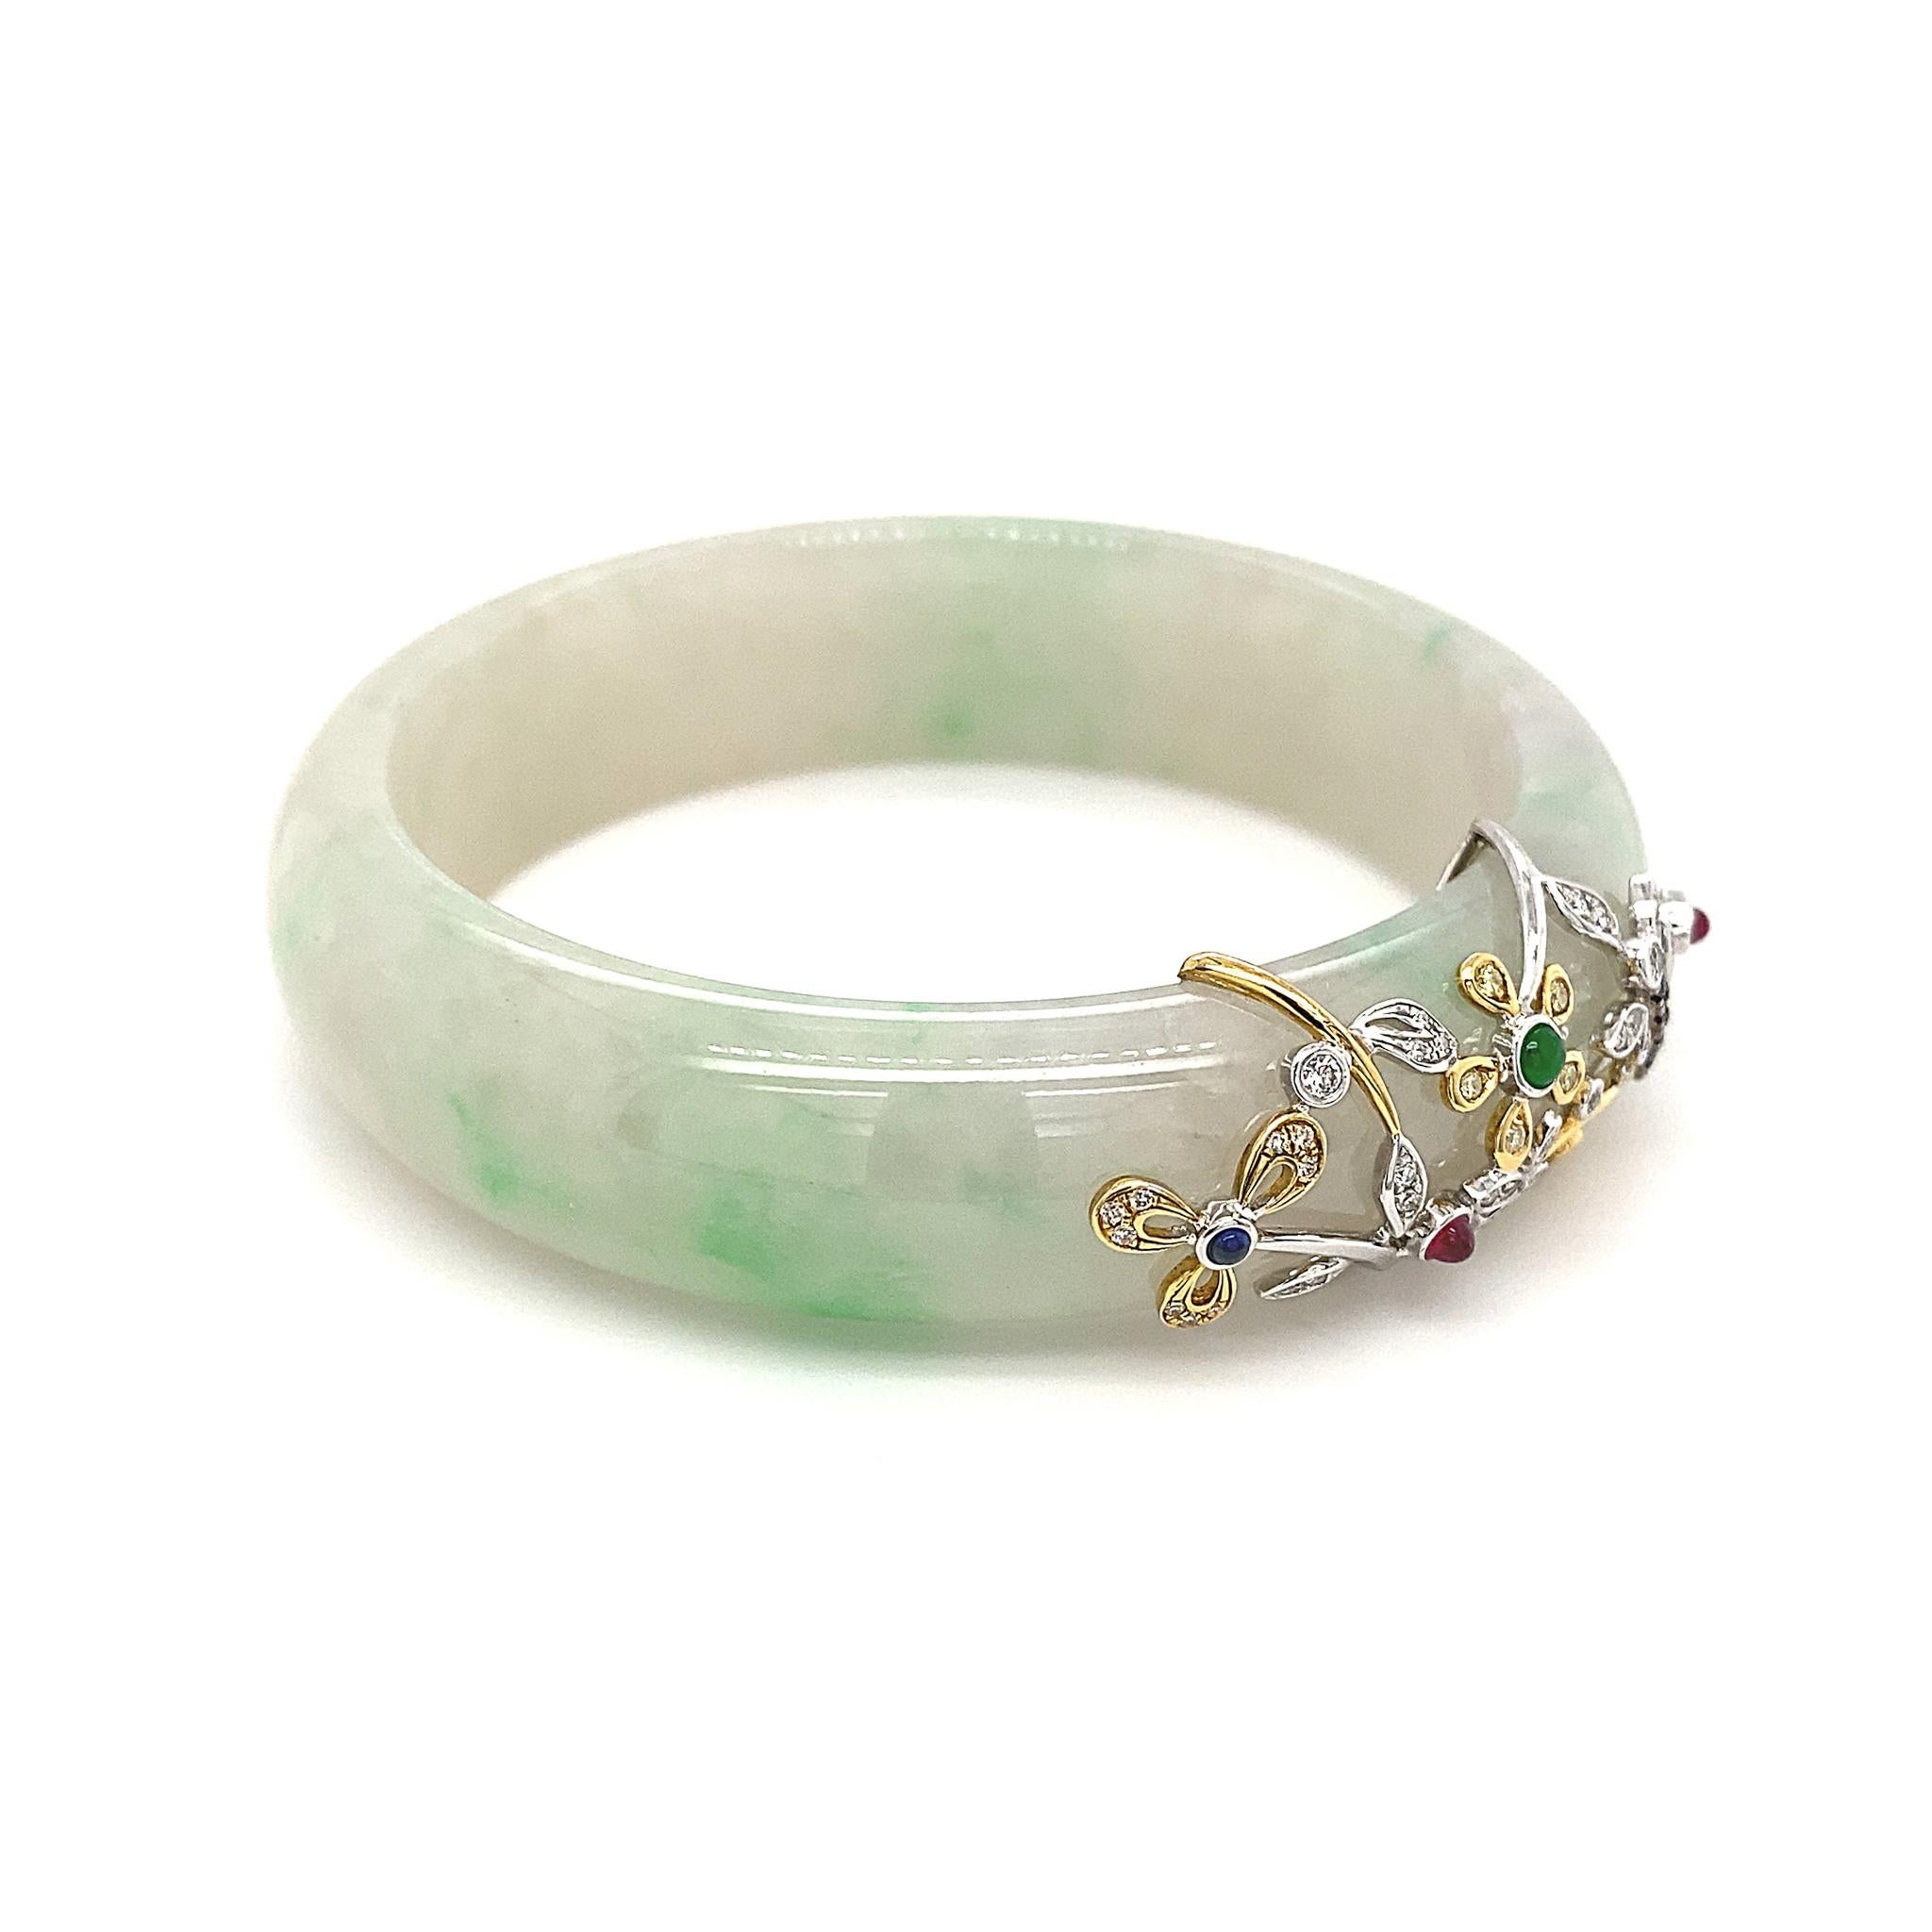 Mixed Cut HKJSL Certified Jade 'Botanica' Bangle by Dilys' in 18K Yellow & White Gold For Sale